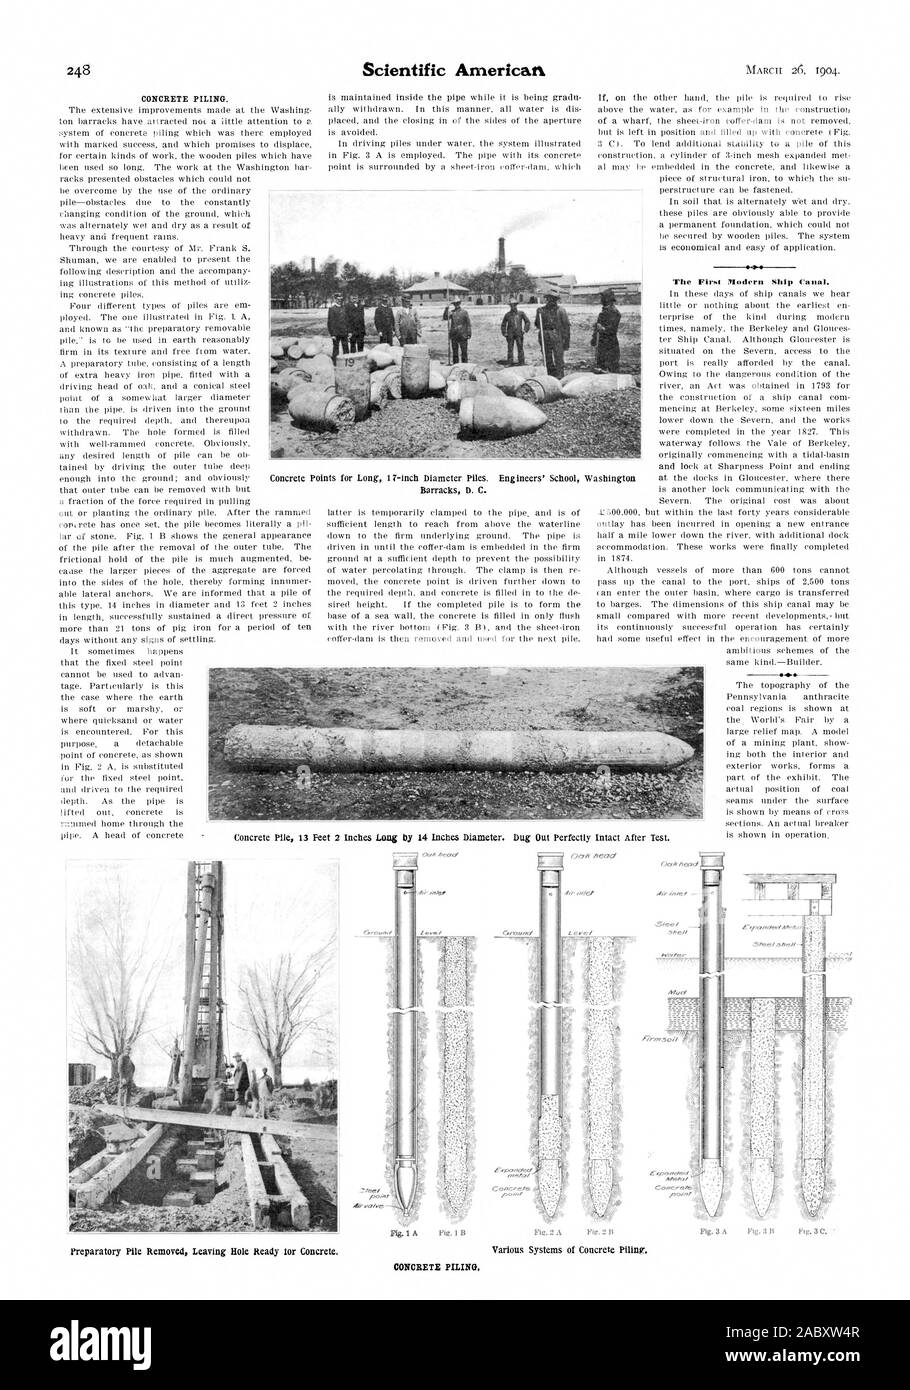 The First Modern Ship Canal. dirinlef  c 31e OVestm Mud' ExpolvdccI Medea COnCe.eWr point, scientific american, 1904-03-26 Stock Photo